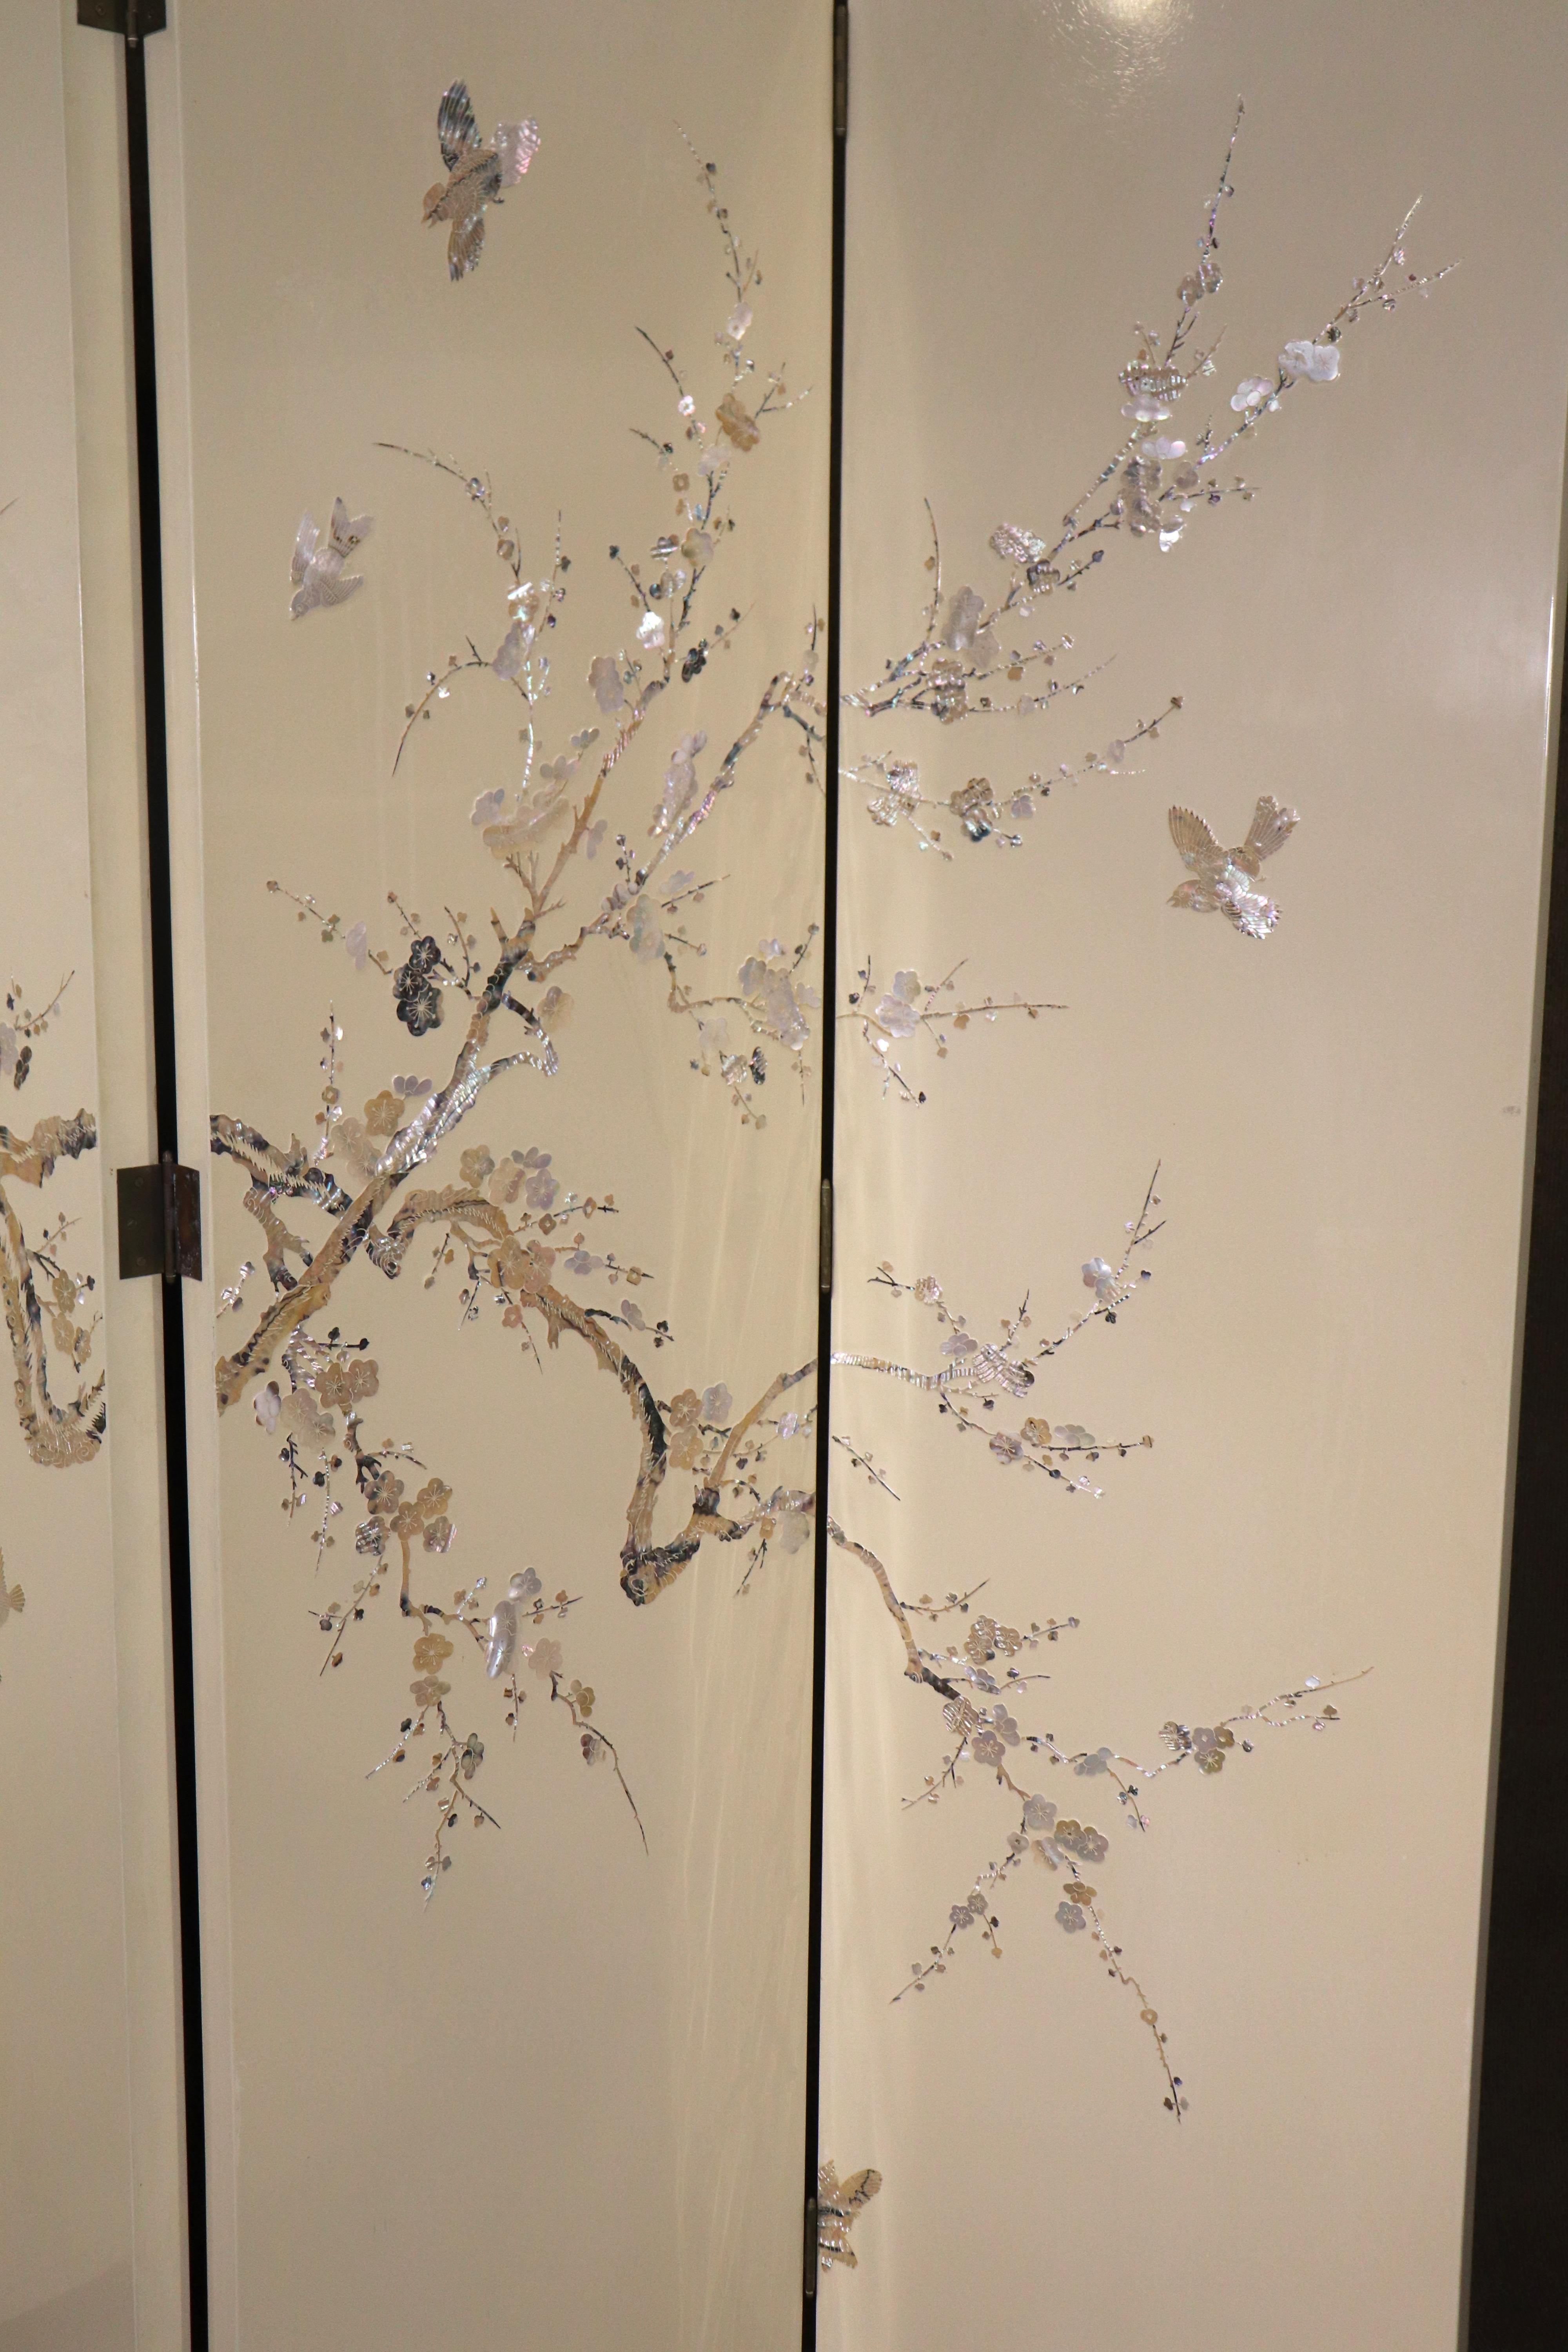 Gorgeous folding screen with mother of pearl designs. Asian style design with birds in trees, all done with iridescent pearl.
Each panel is 18